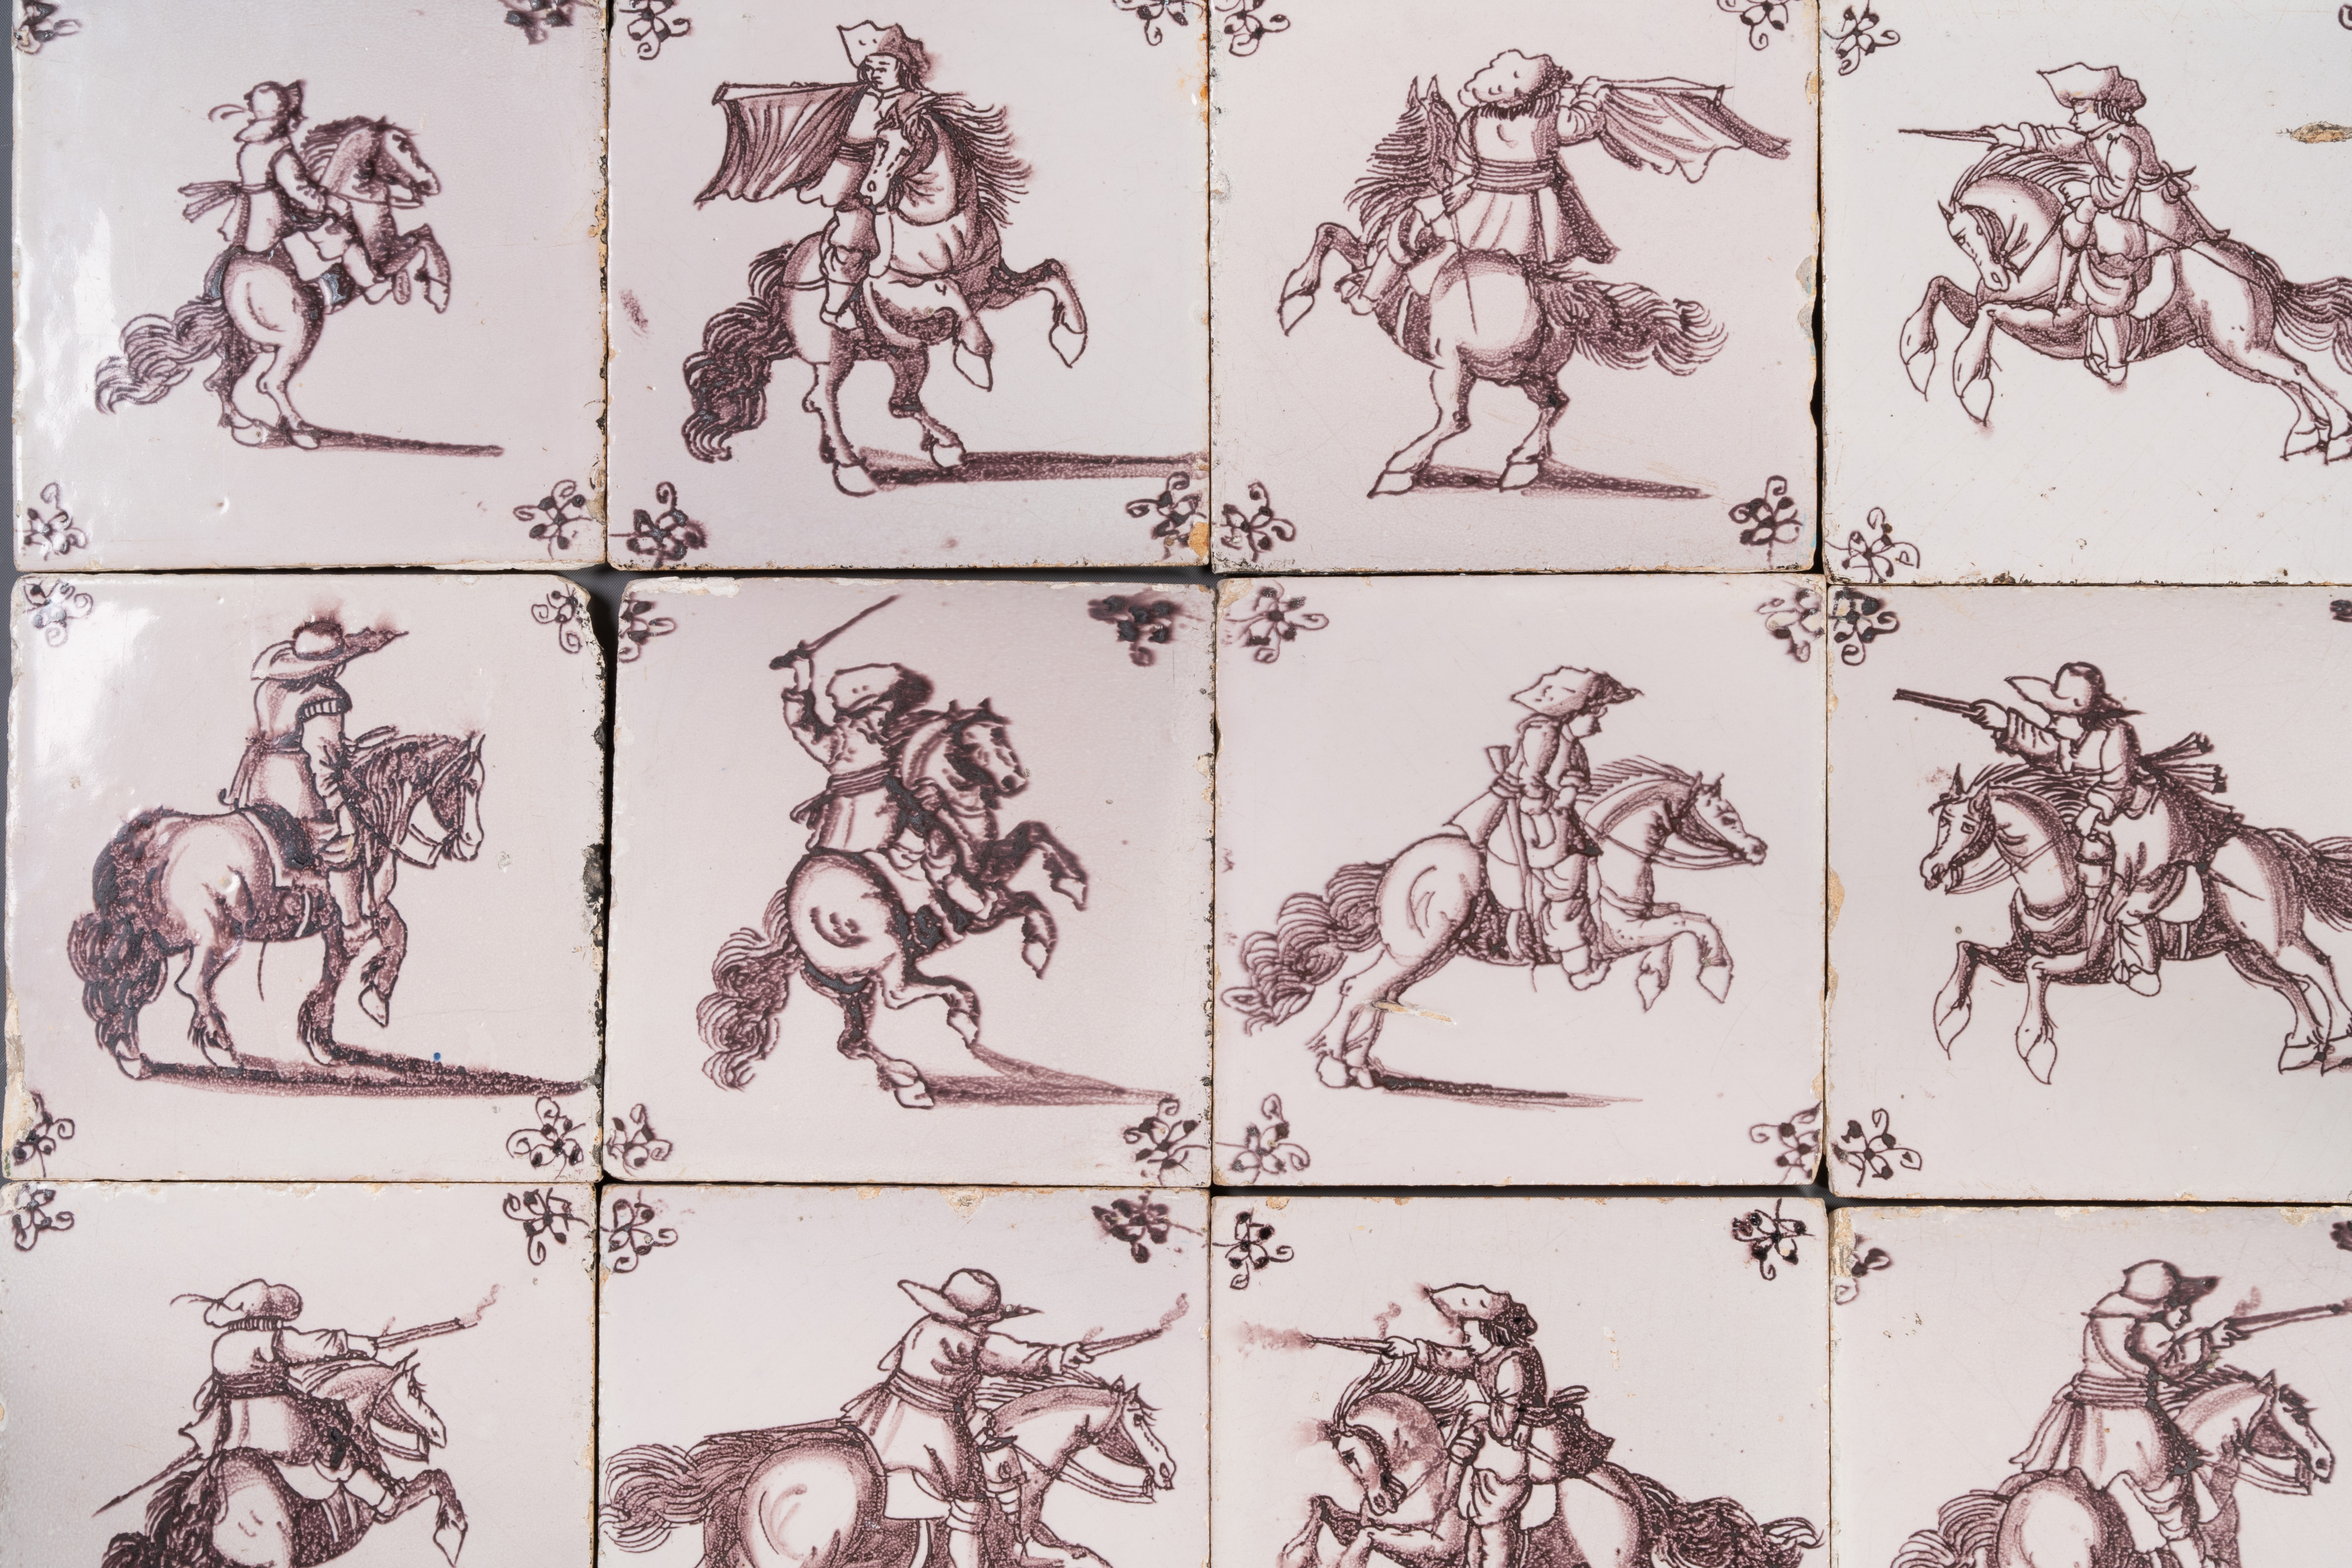 Fifteen Dutch Delft manganese tiles with horse riders, late 17th C. - Image 2 of 13